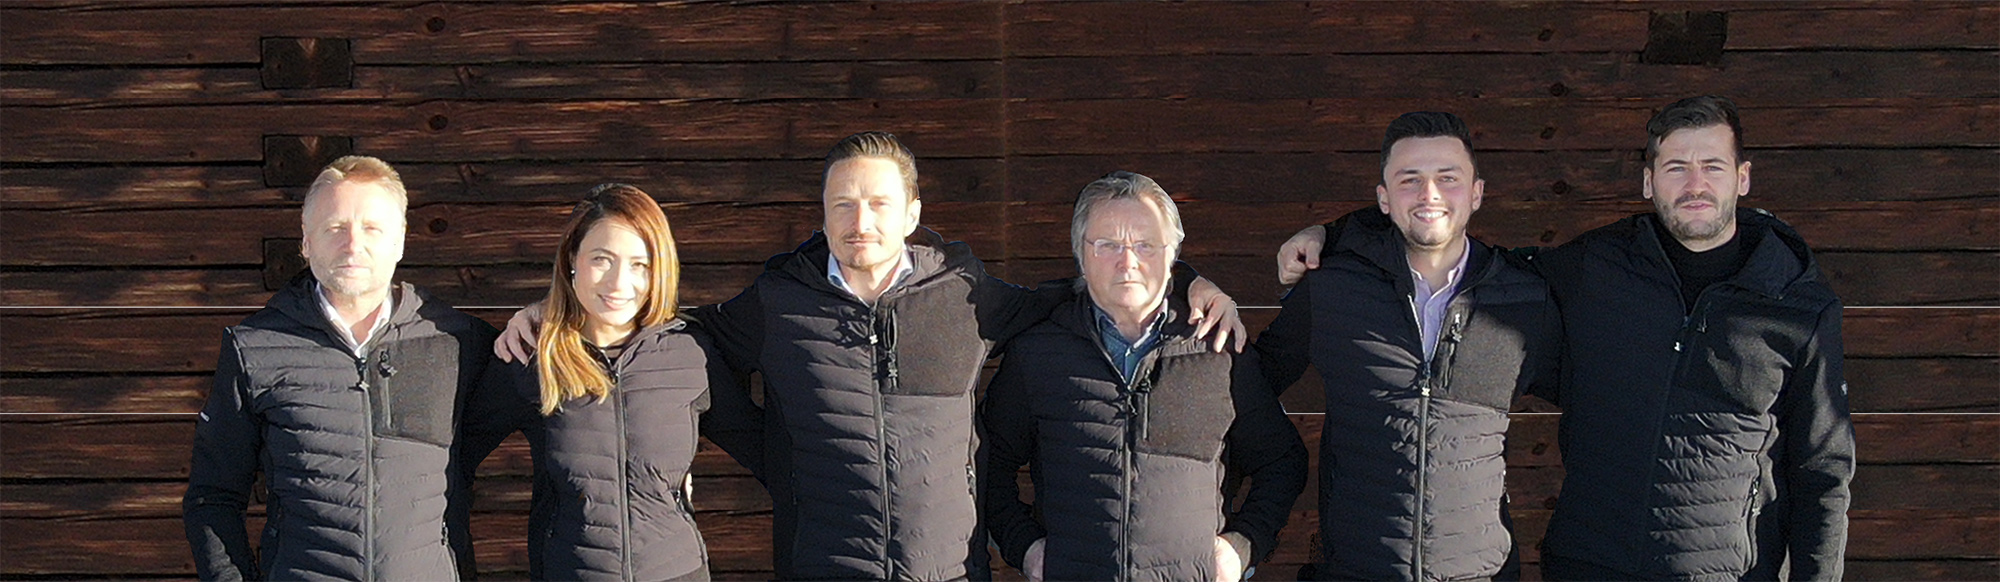 unser team - Solenso & Co GmbH